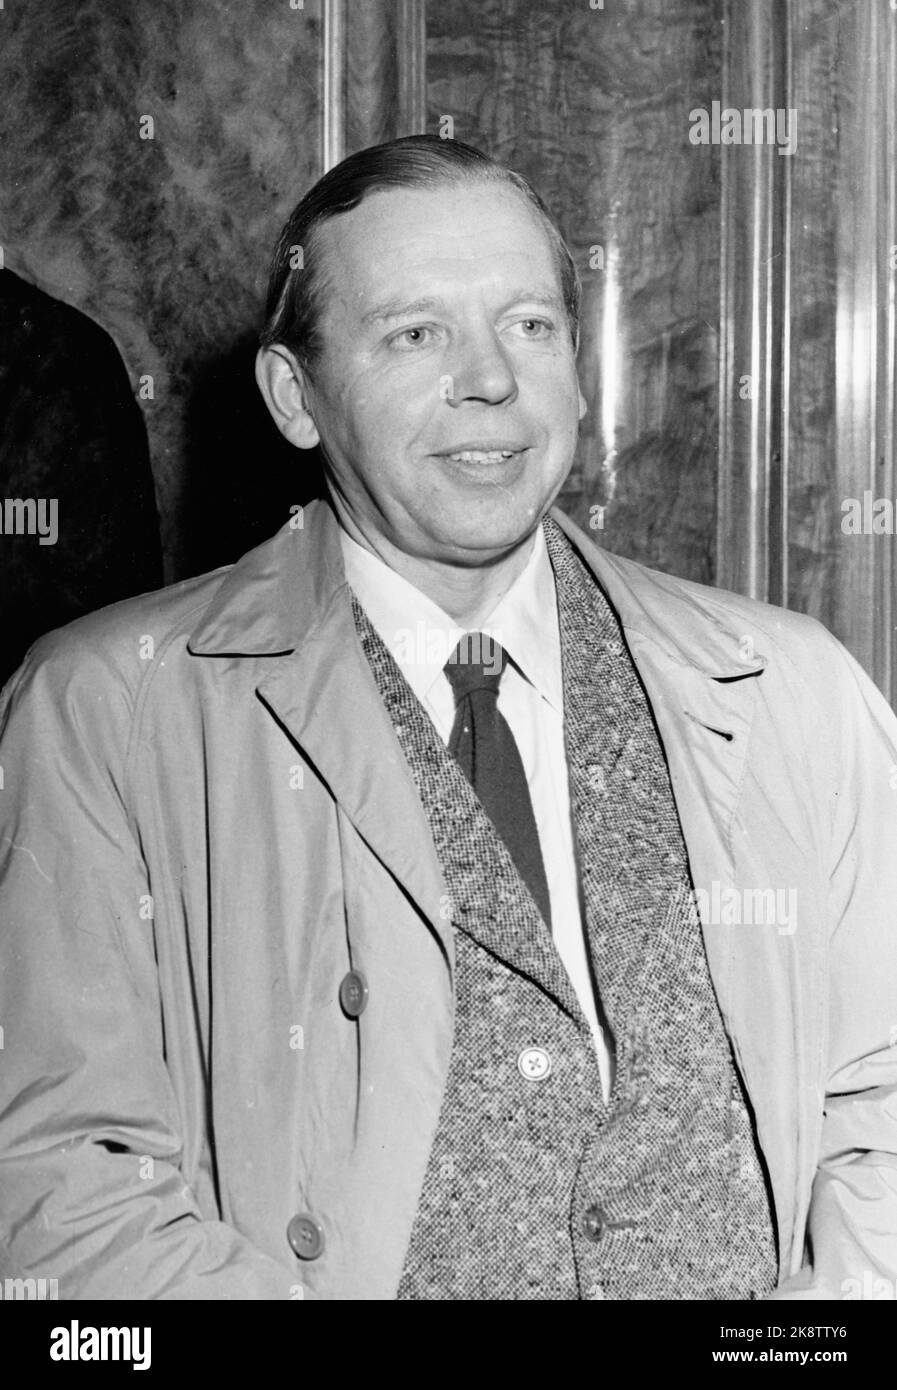 Oslo 194908. Erling Wikborg, politician (KrF). Here from once he gave a speech in the broadcast. Erling Wikborg, politician and lawyer. He was the leader of the Christian People's Party between 1951 and 1955, parliamentary leader between 1954 and 1961. Has a parliamentary representative for Akershus 1945 - 1949, and for Oslo 1954 - 1961. He was Foreign Minister of the Lyng government in 1963. Photo: NTB / NTB Stock Photo